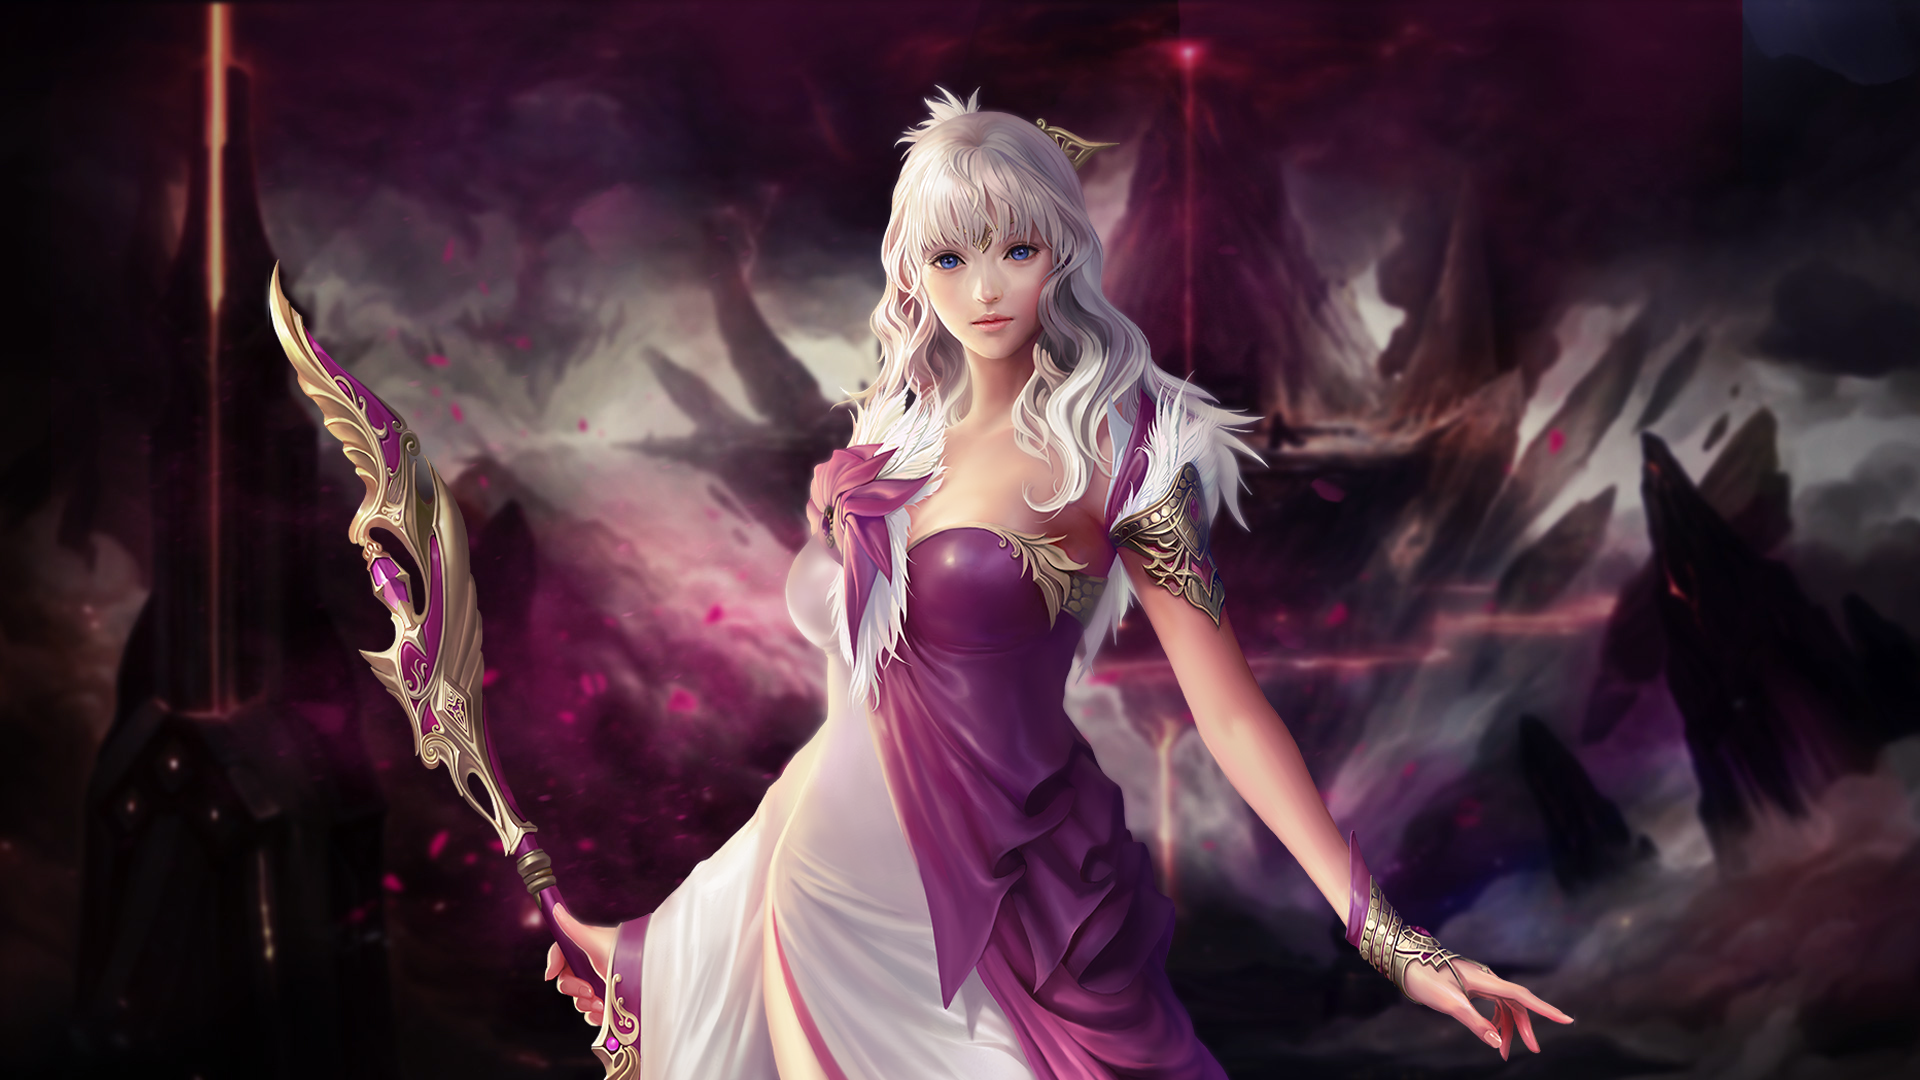 PC Gaming Video Games Mmorpg Cabal Cabal Ii Long Hair Violet Hair Blue Eyes Scepters Women Fantasy W 1920x1080